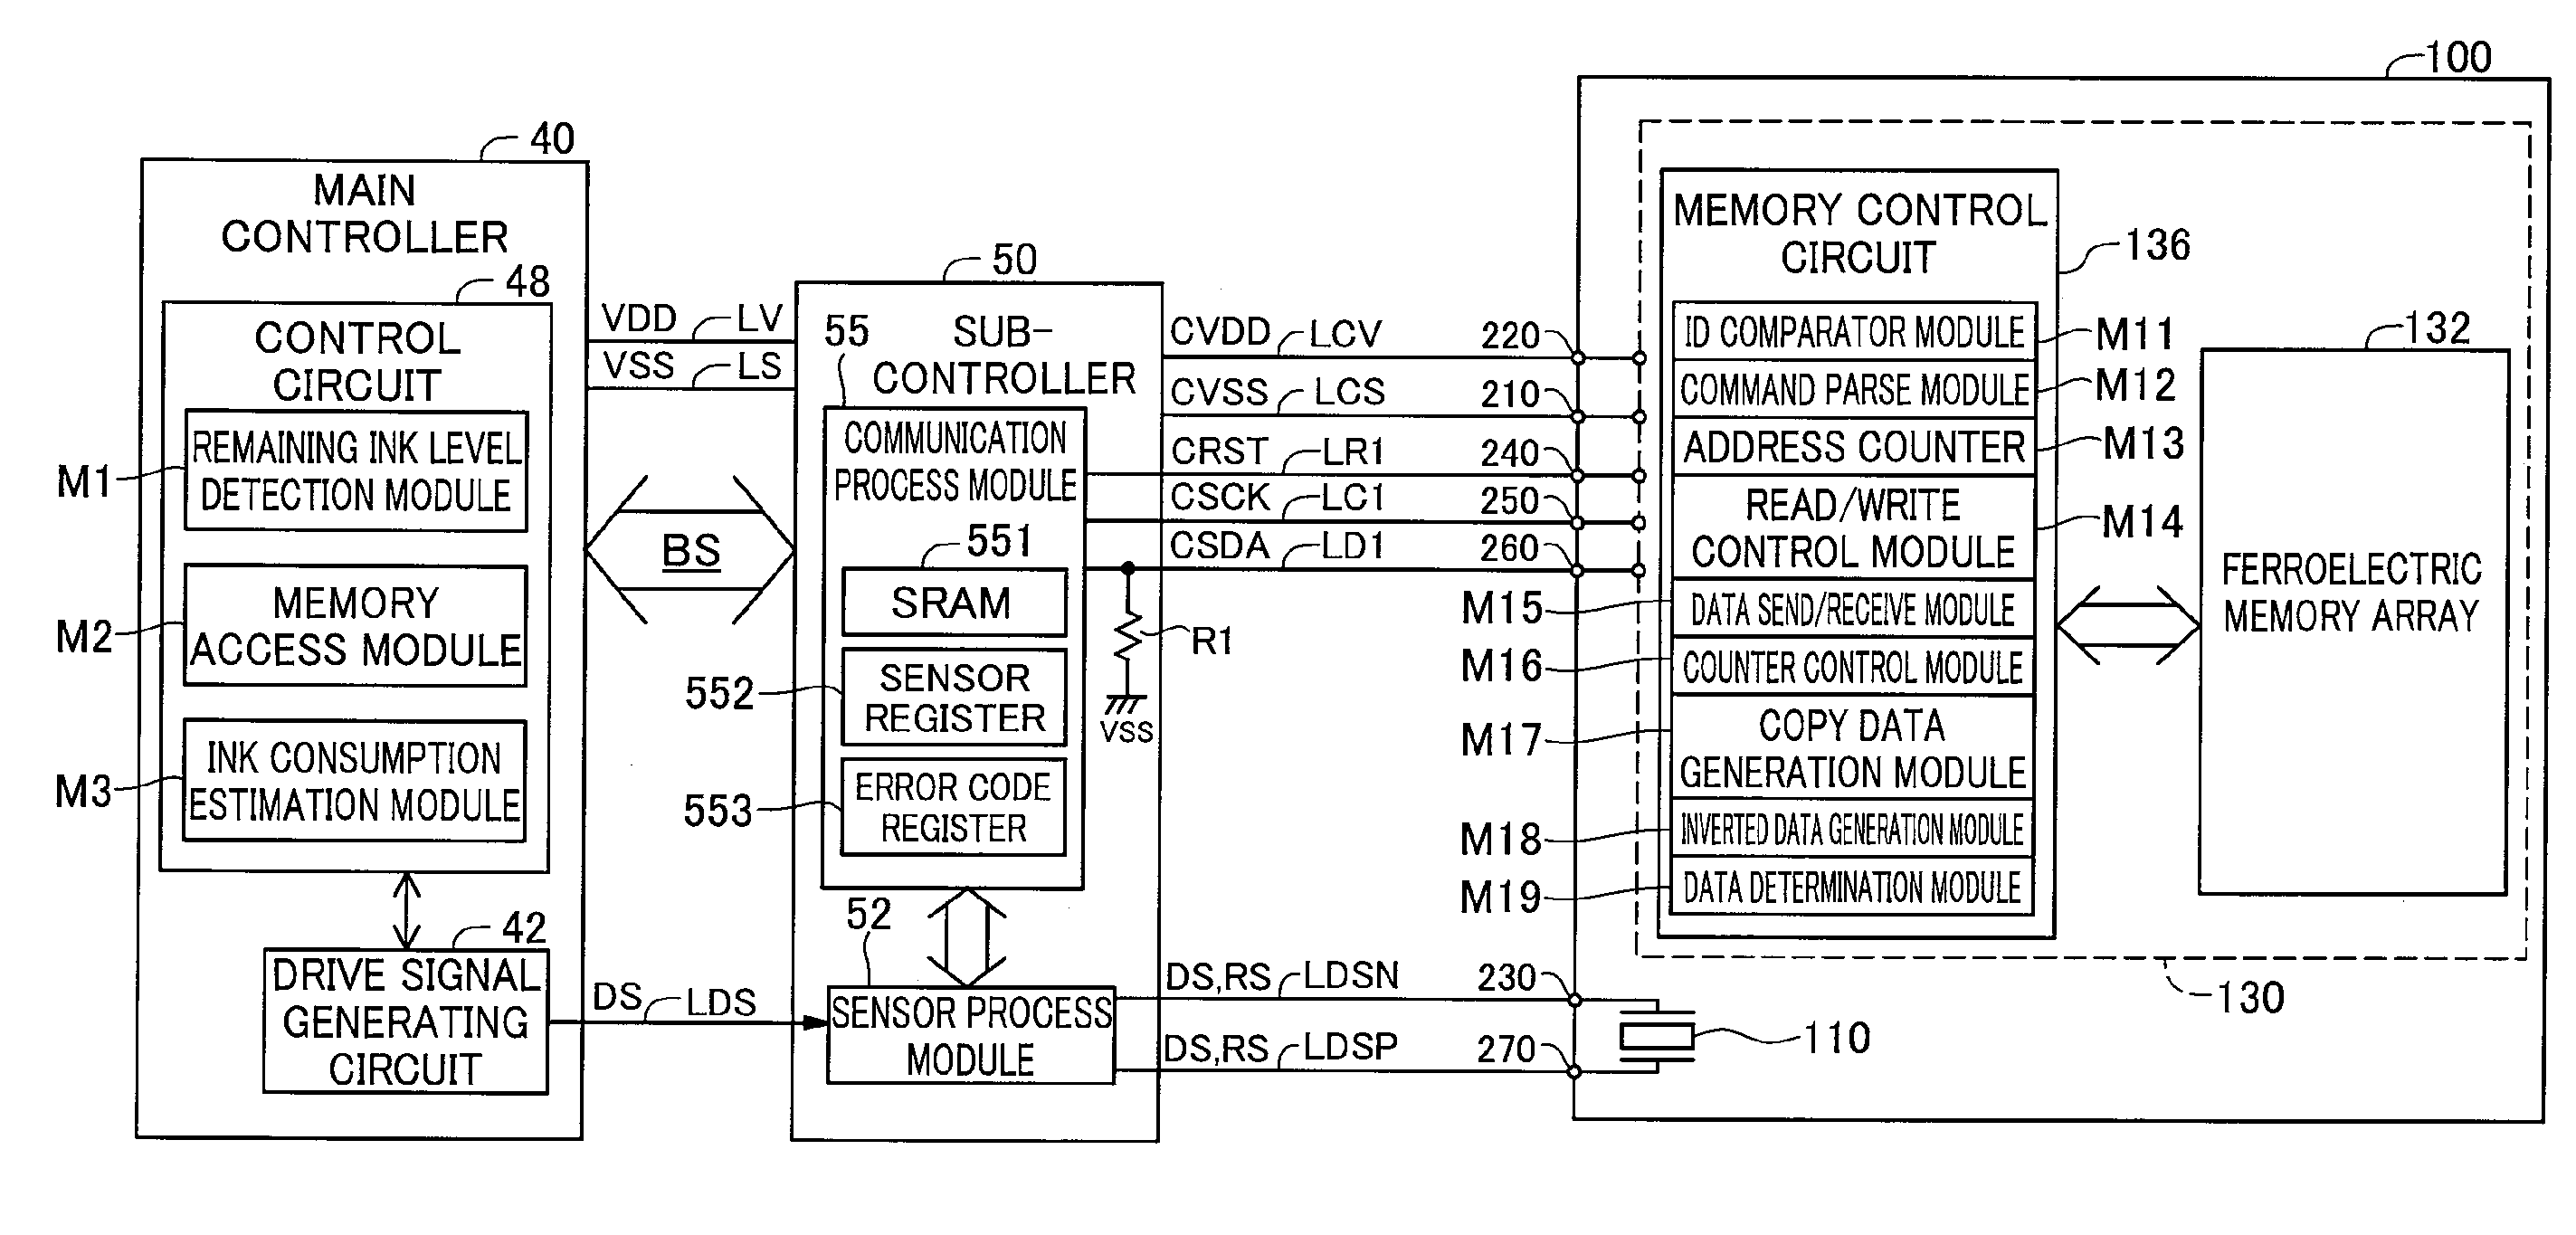 Memory device and system including a memory device electronically connectable to a host circuit